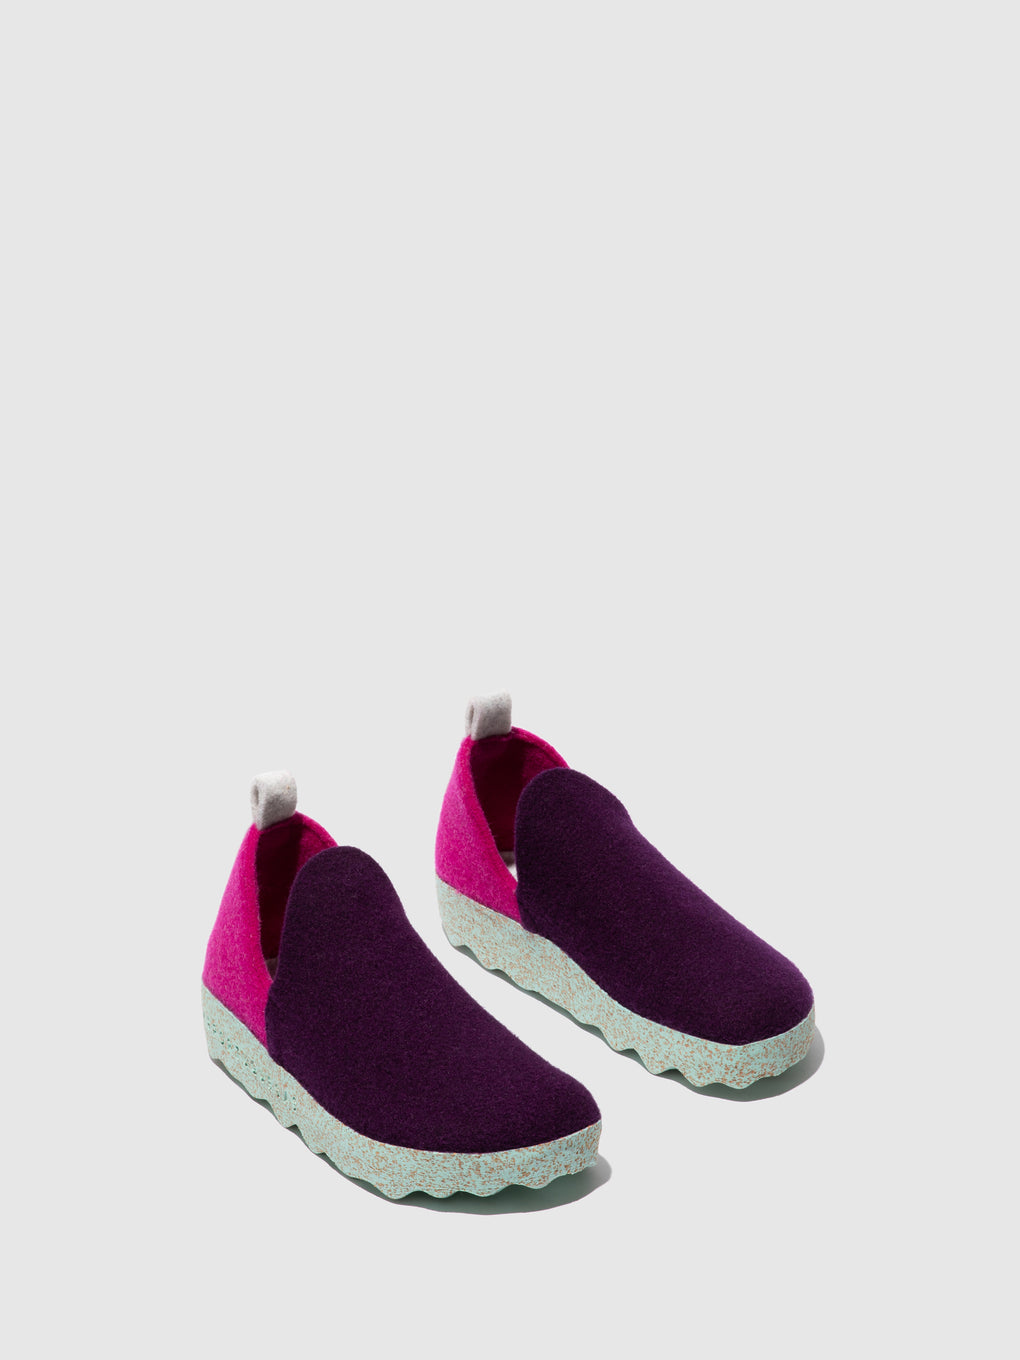 Round Toe Shoes CITY PINK PURPLE